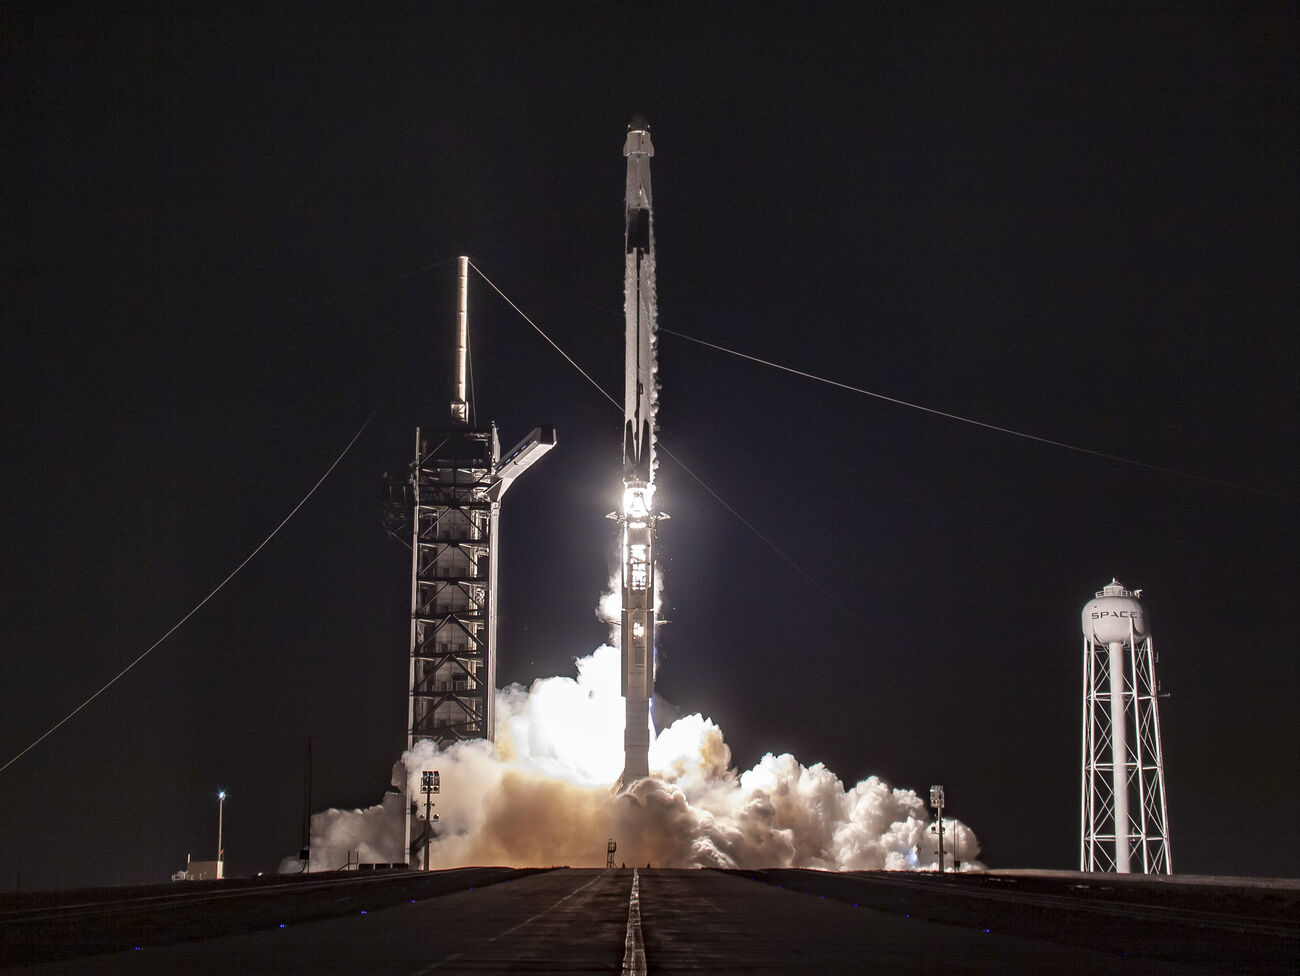 SpaceX launched another 60 Starlink / GORDON satellites into orbit